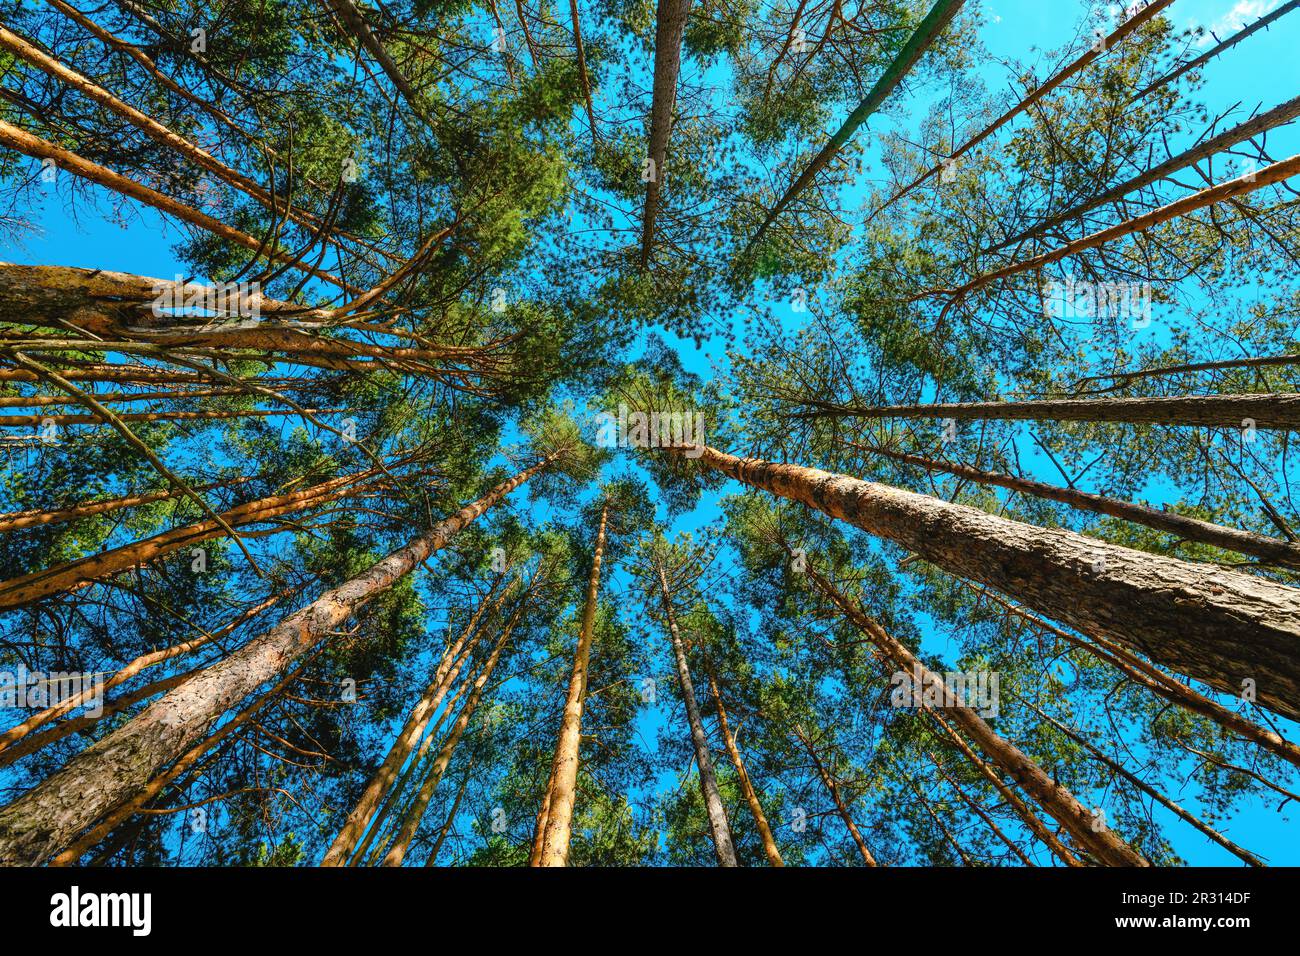 Low angle view of tall pine tree woodland in summer with blue sky above the evergreen treetops. Natural parkland at Zlatibor, Serbia. Stock Photo